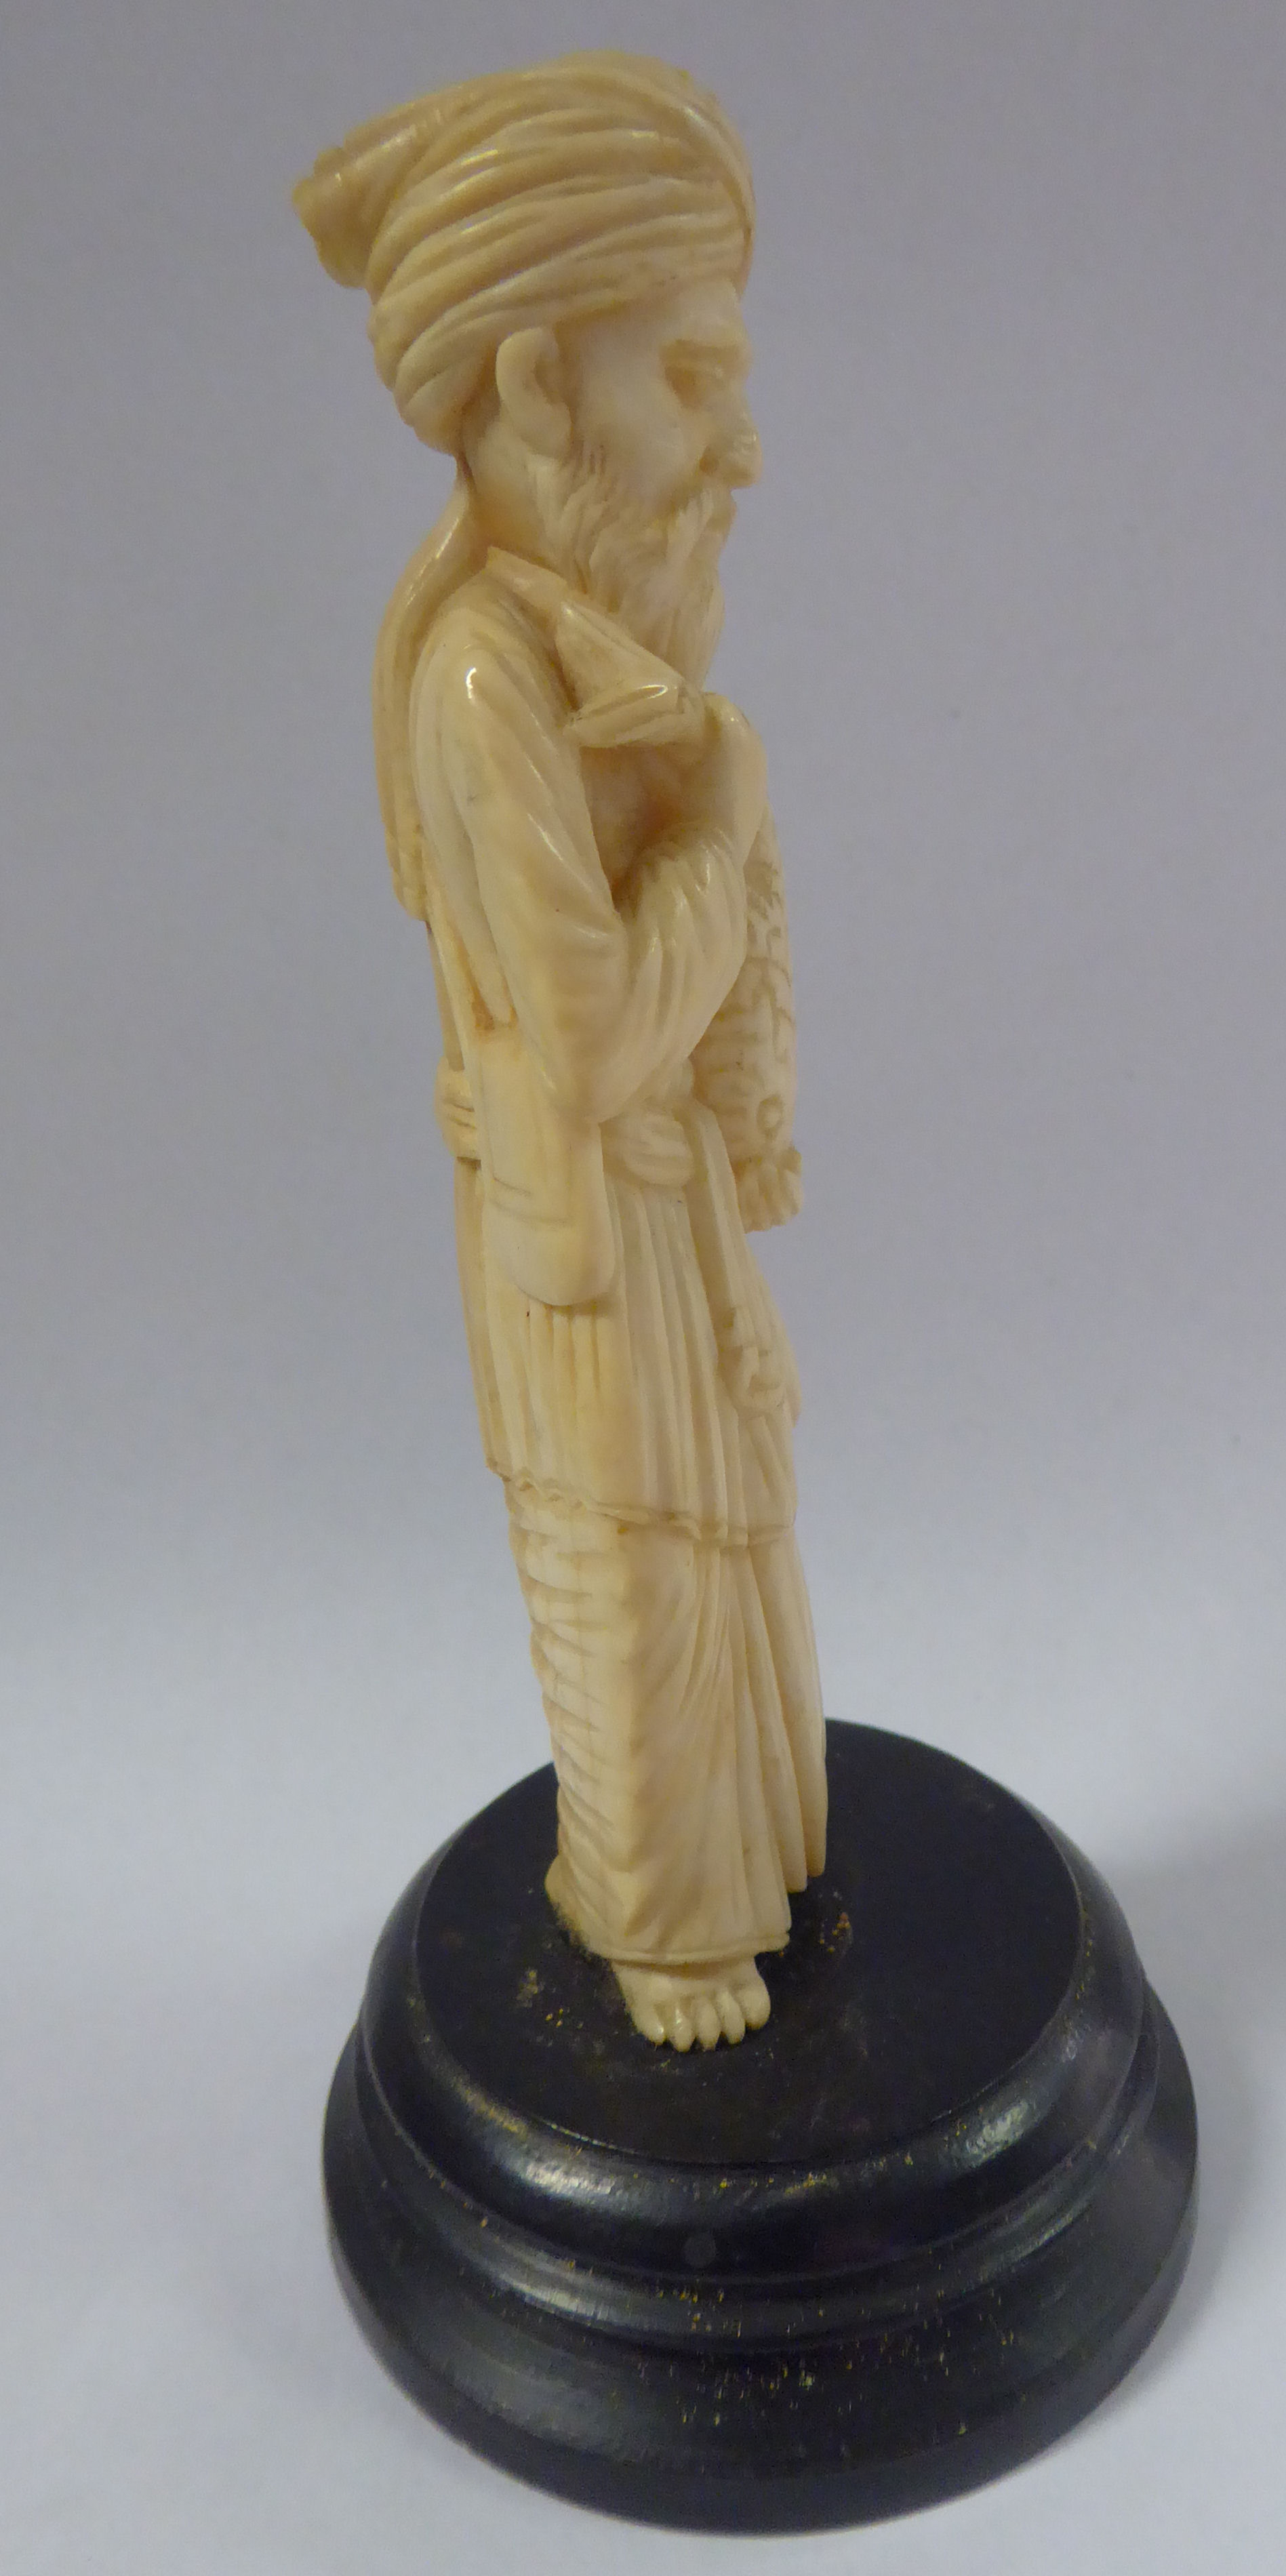 An early 20thC Asian carved ivory standing figure, a bearded man, wearing a turban and robes, - Image 4 of 6